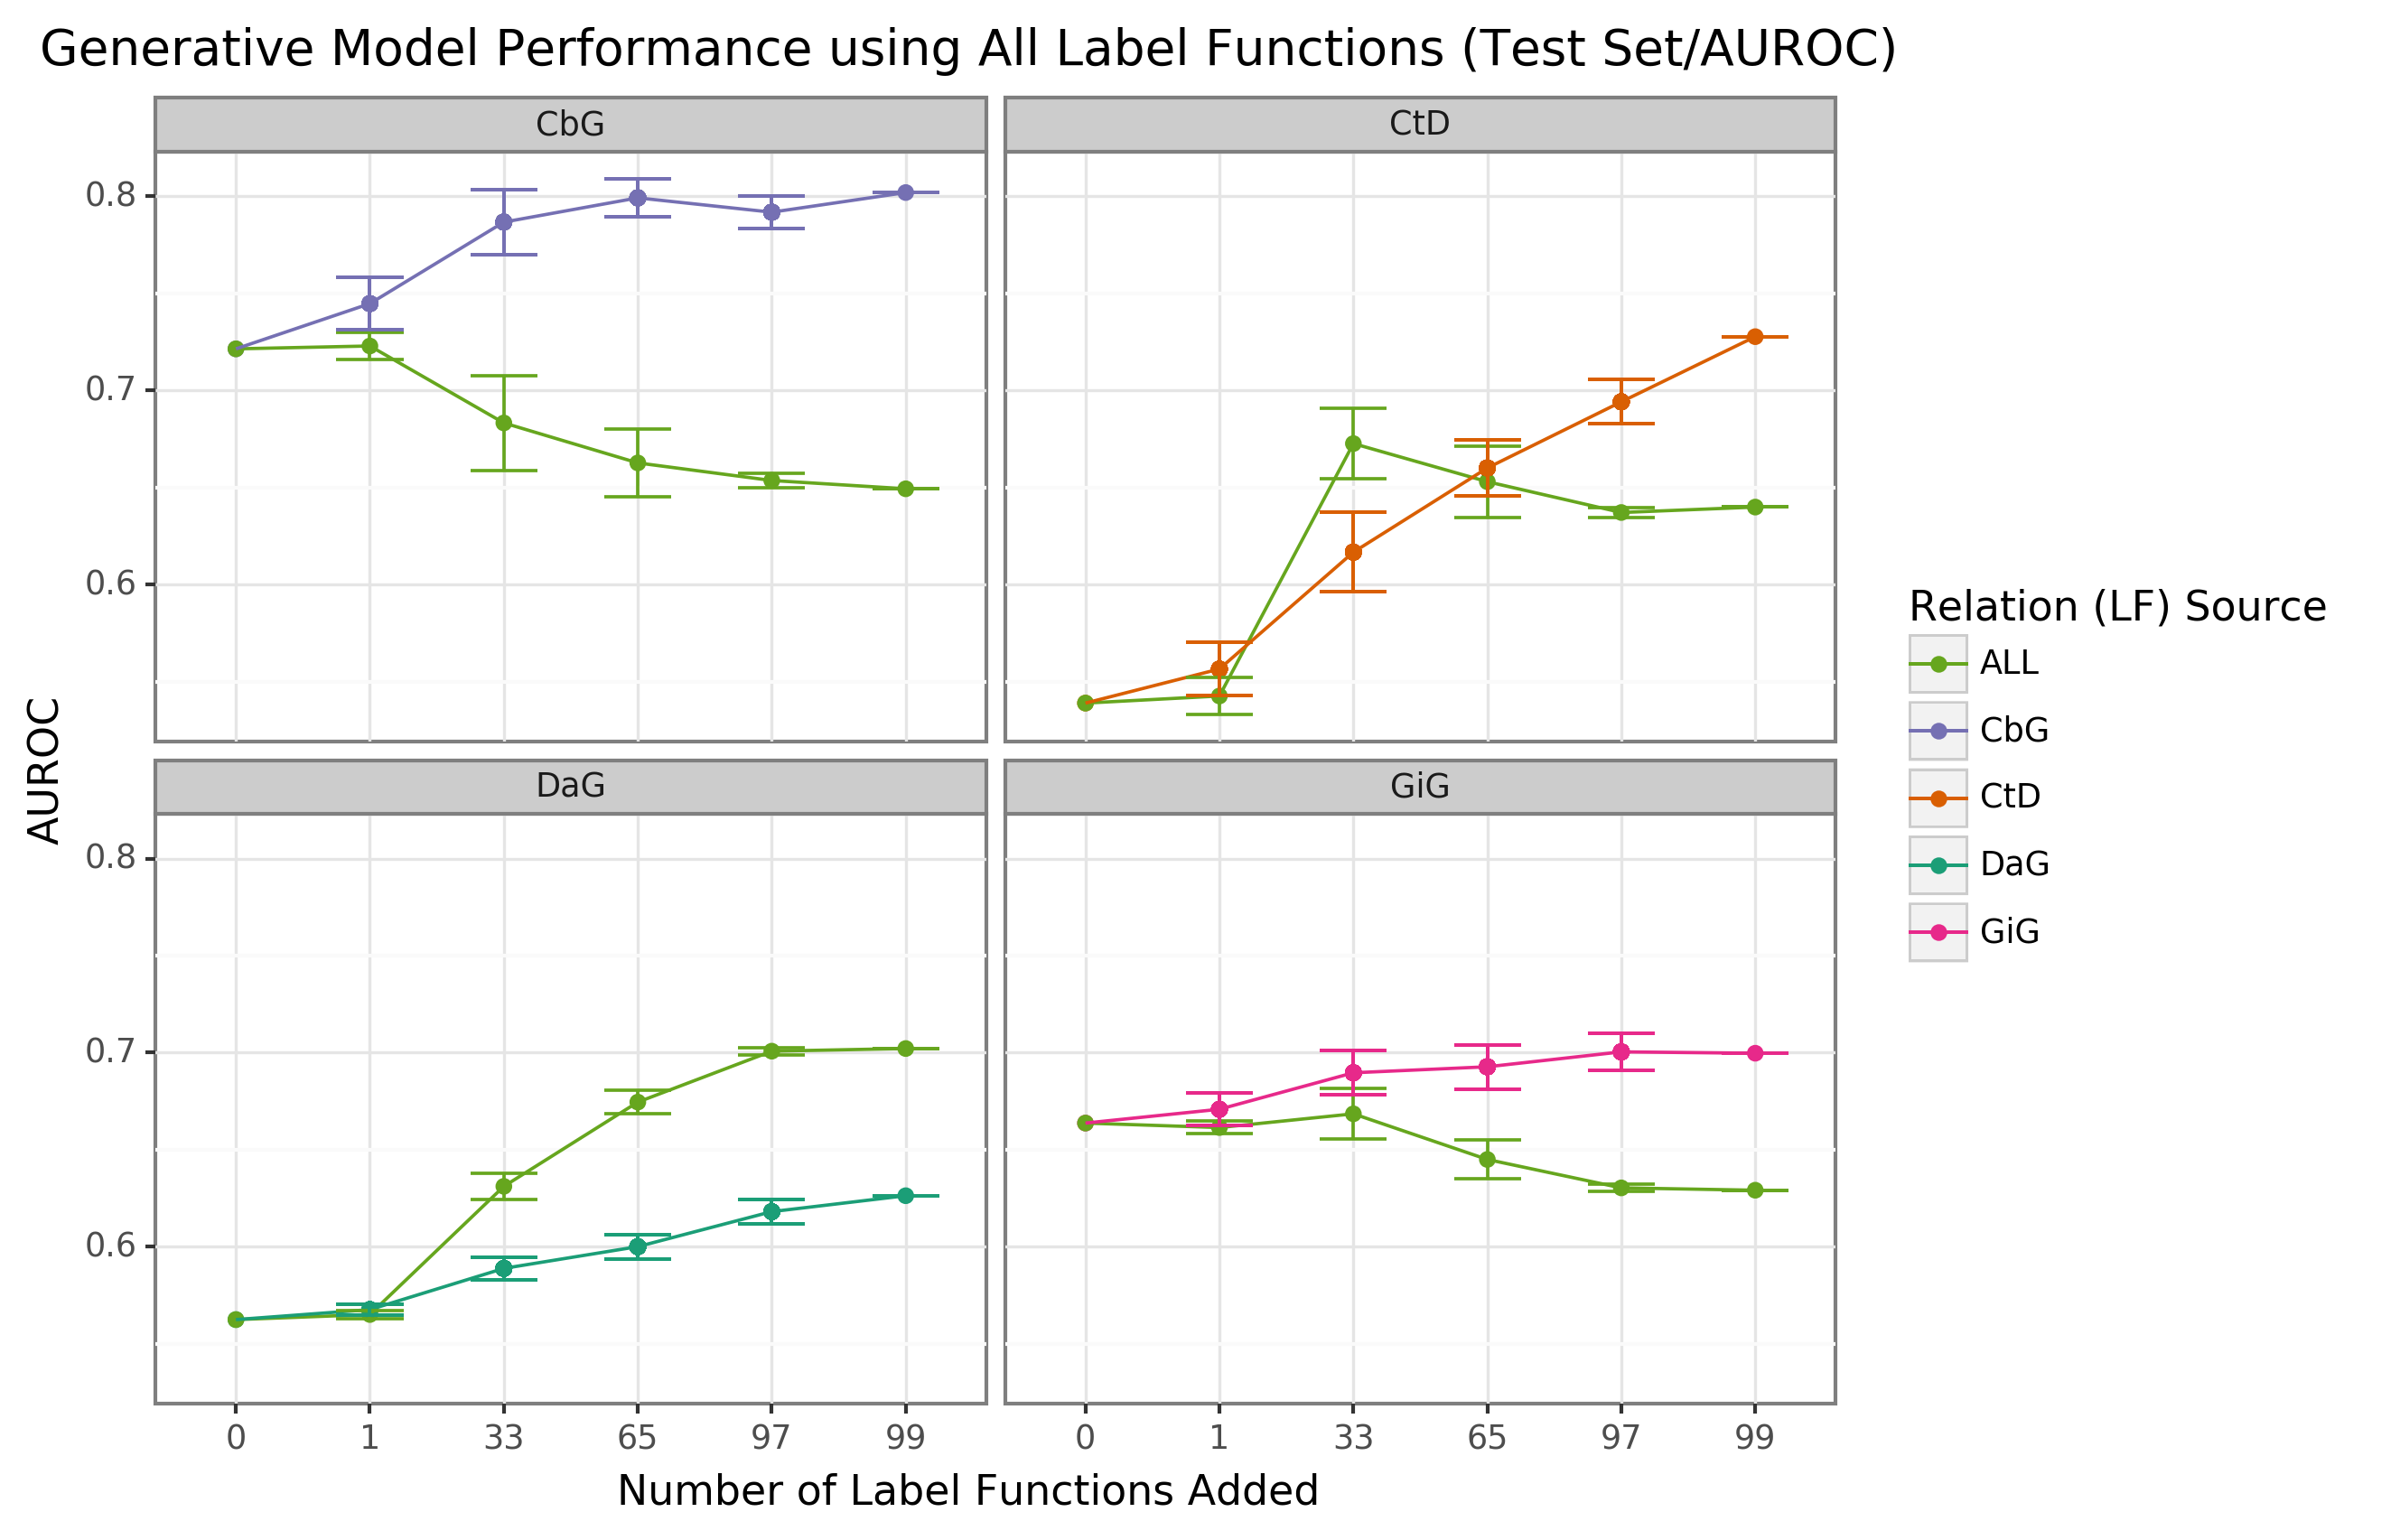 Figure 3: Using all label functions generally hinders generative model performance. Each line plot header depicts the edge type the generative model is trying to predict, while the colors represent the source of label functions. For example, orange represents sampling label functions designed to predict the Compound-treats-Disease (CtD) edge type. The x-axis shows the number of randomly sampled label functions incorporated as an addition to the database-only baseline model (the point at 0). The y-axis shows the area under the receiver operating curve (AUROC). Each point on the plot shows the average of 50 sample runs, while the error bars show the 95% confidence intervals of all runs. The baseline and “All” data points consist of sampling from the entire fixed set of label functions.